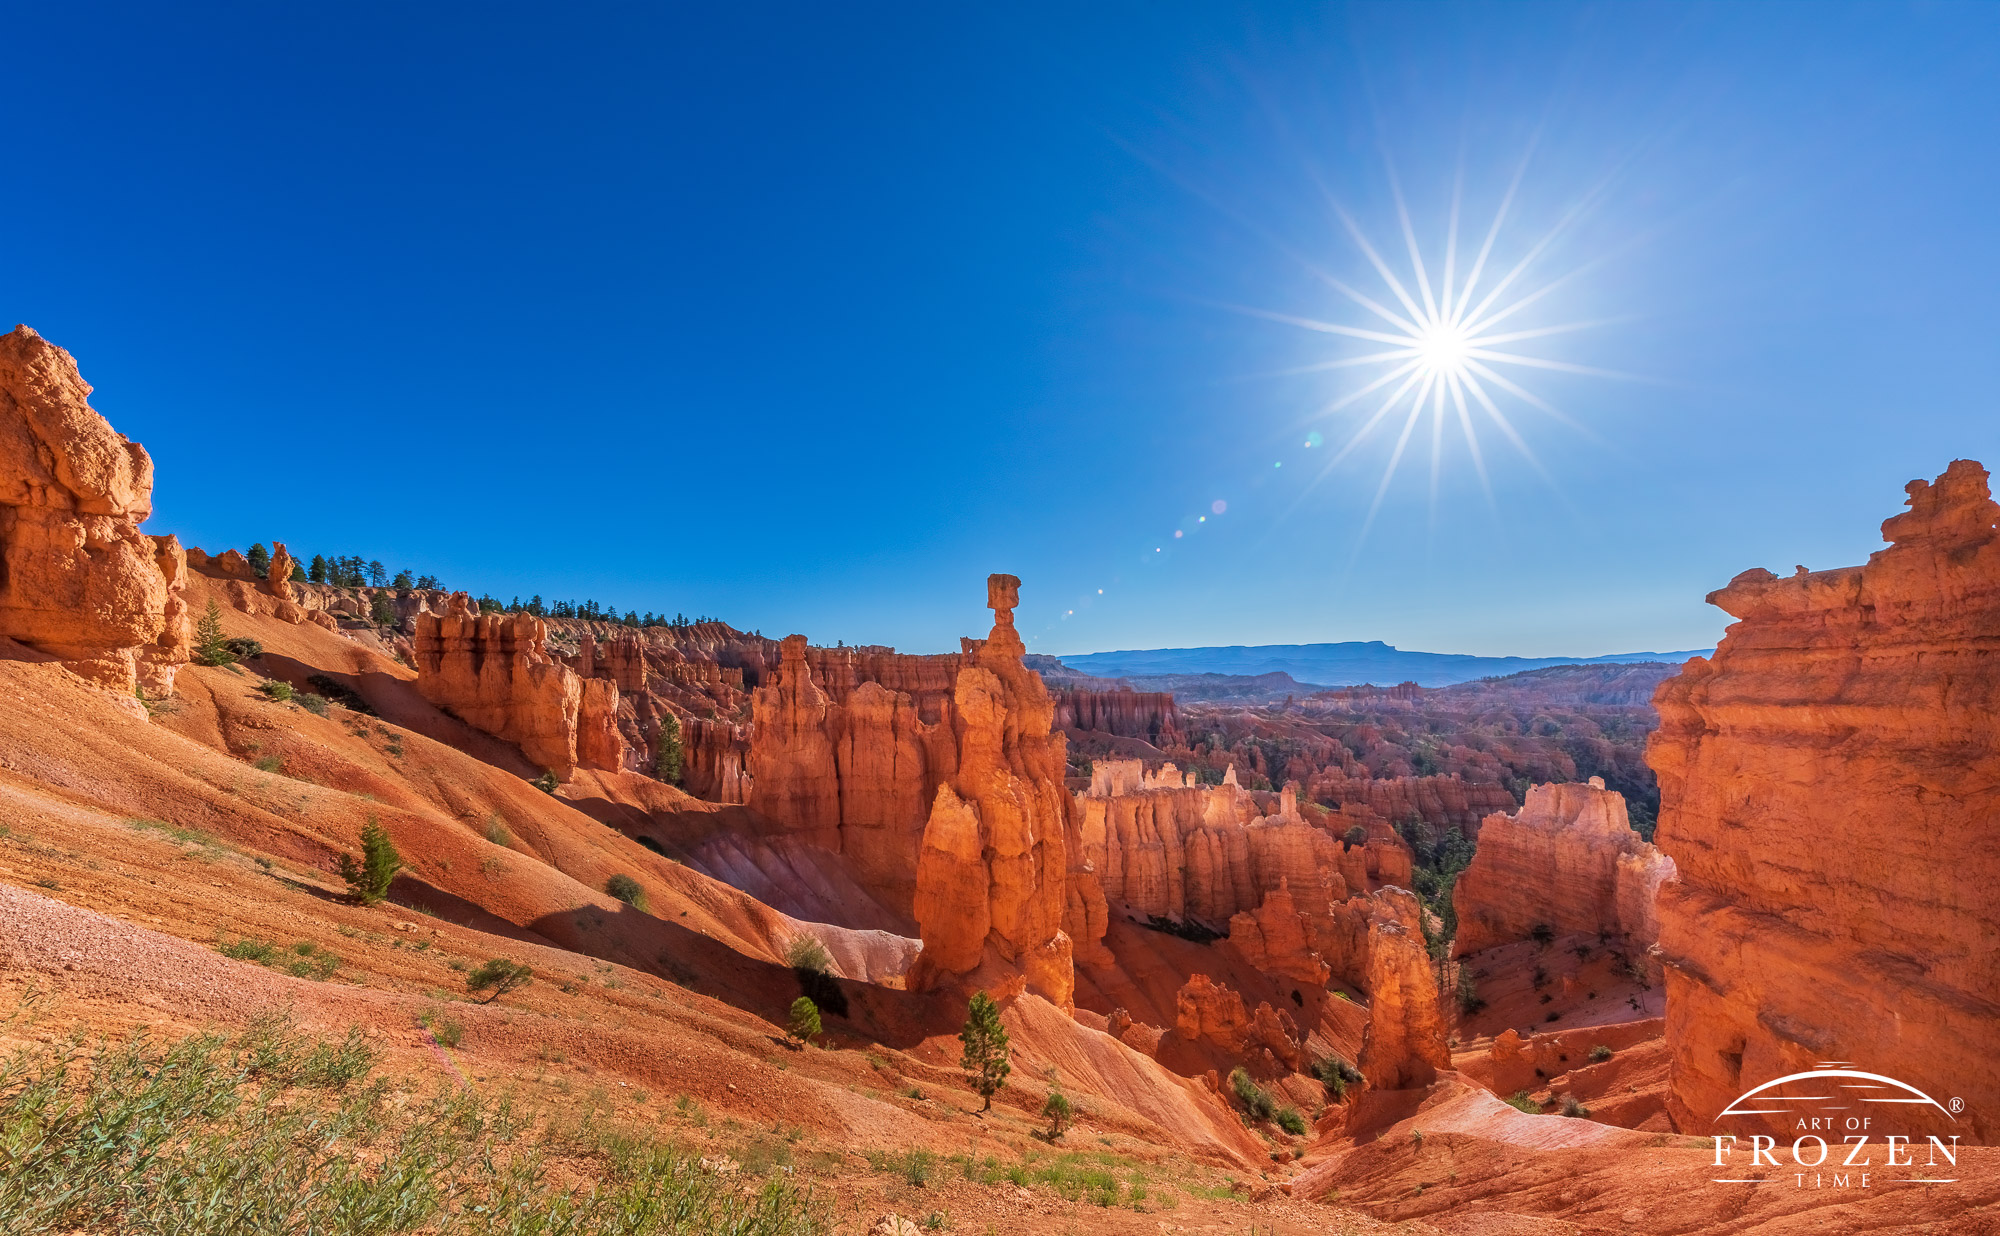 A view of one Bryce Canyon’s hoodoos called Thor’s Hammer which basks in the morning light under blue skies.